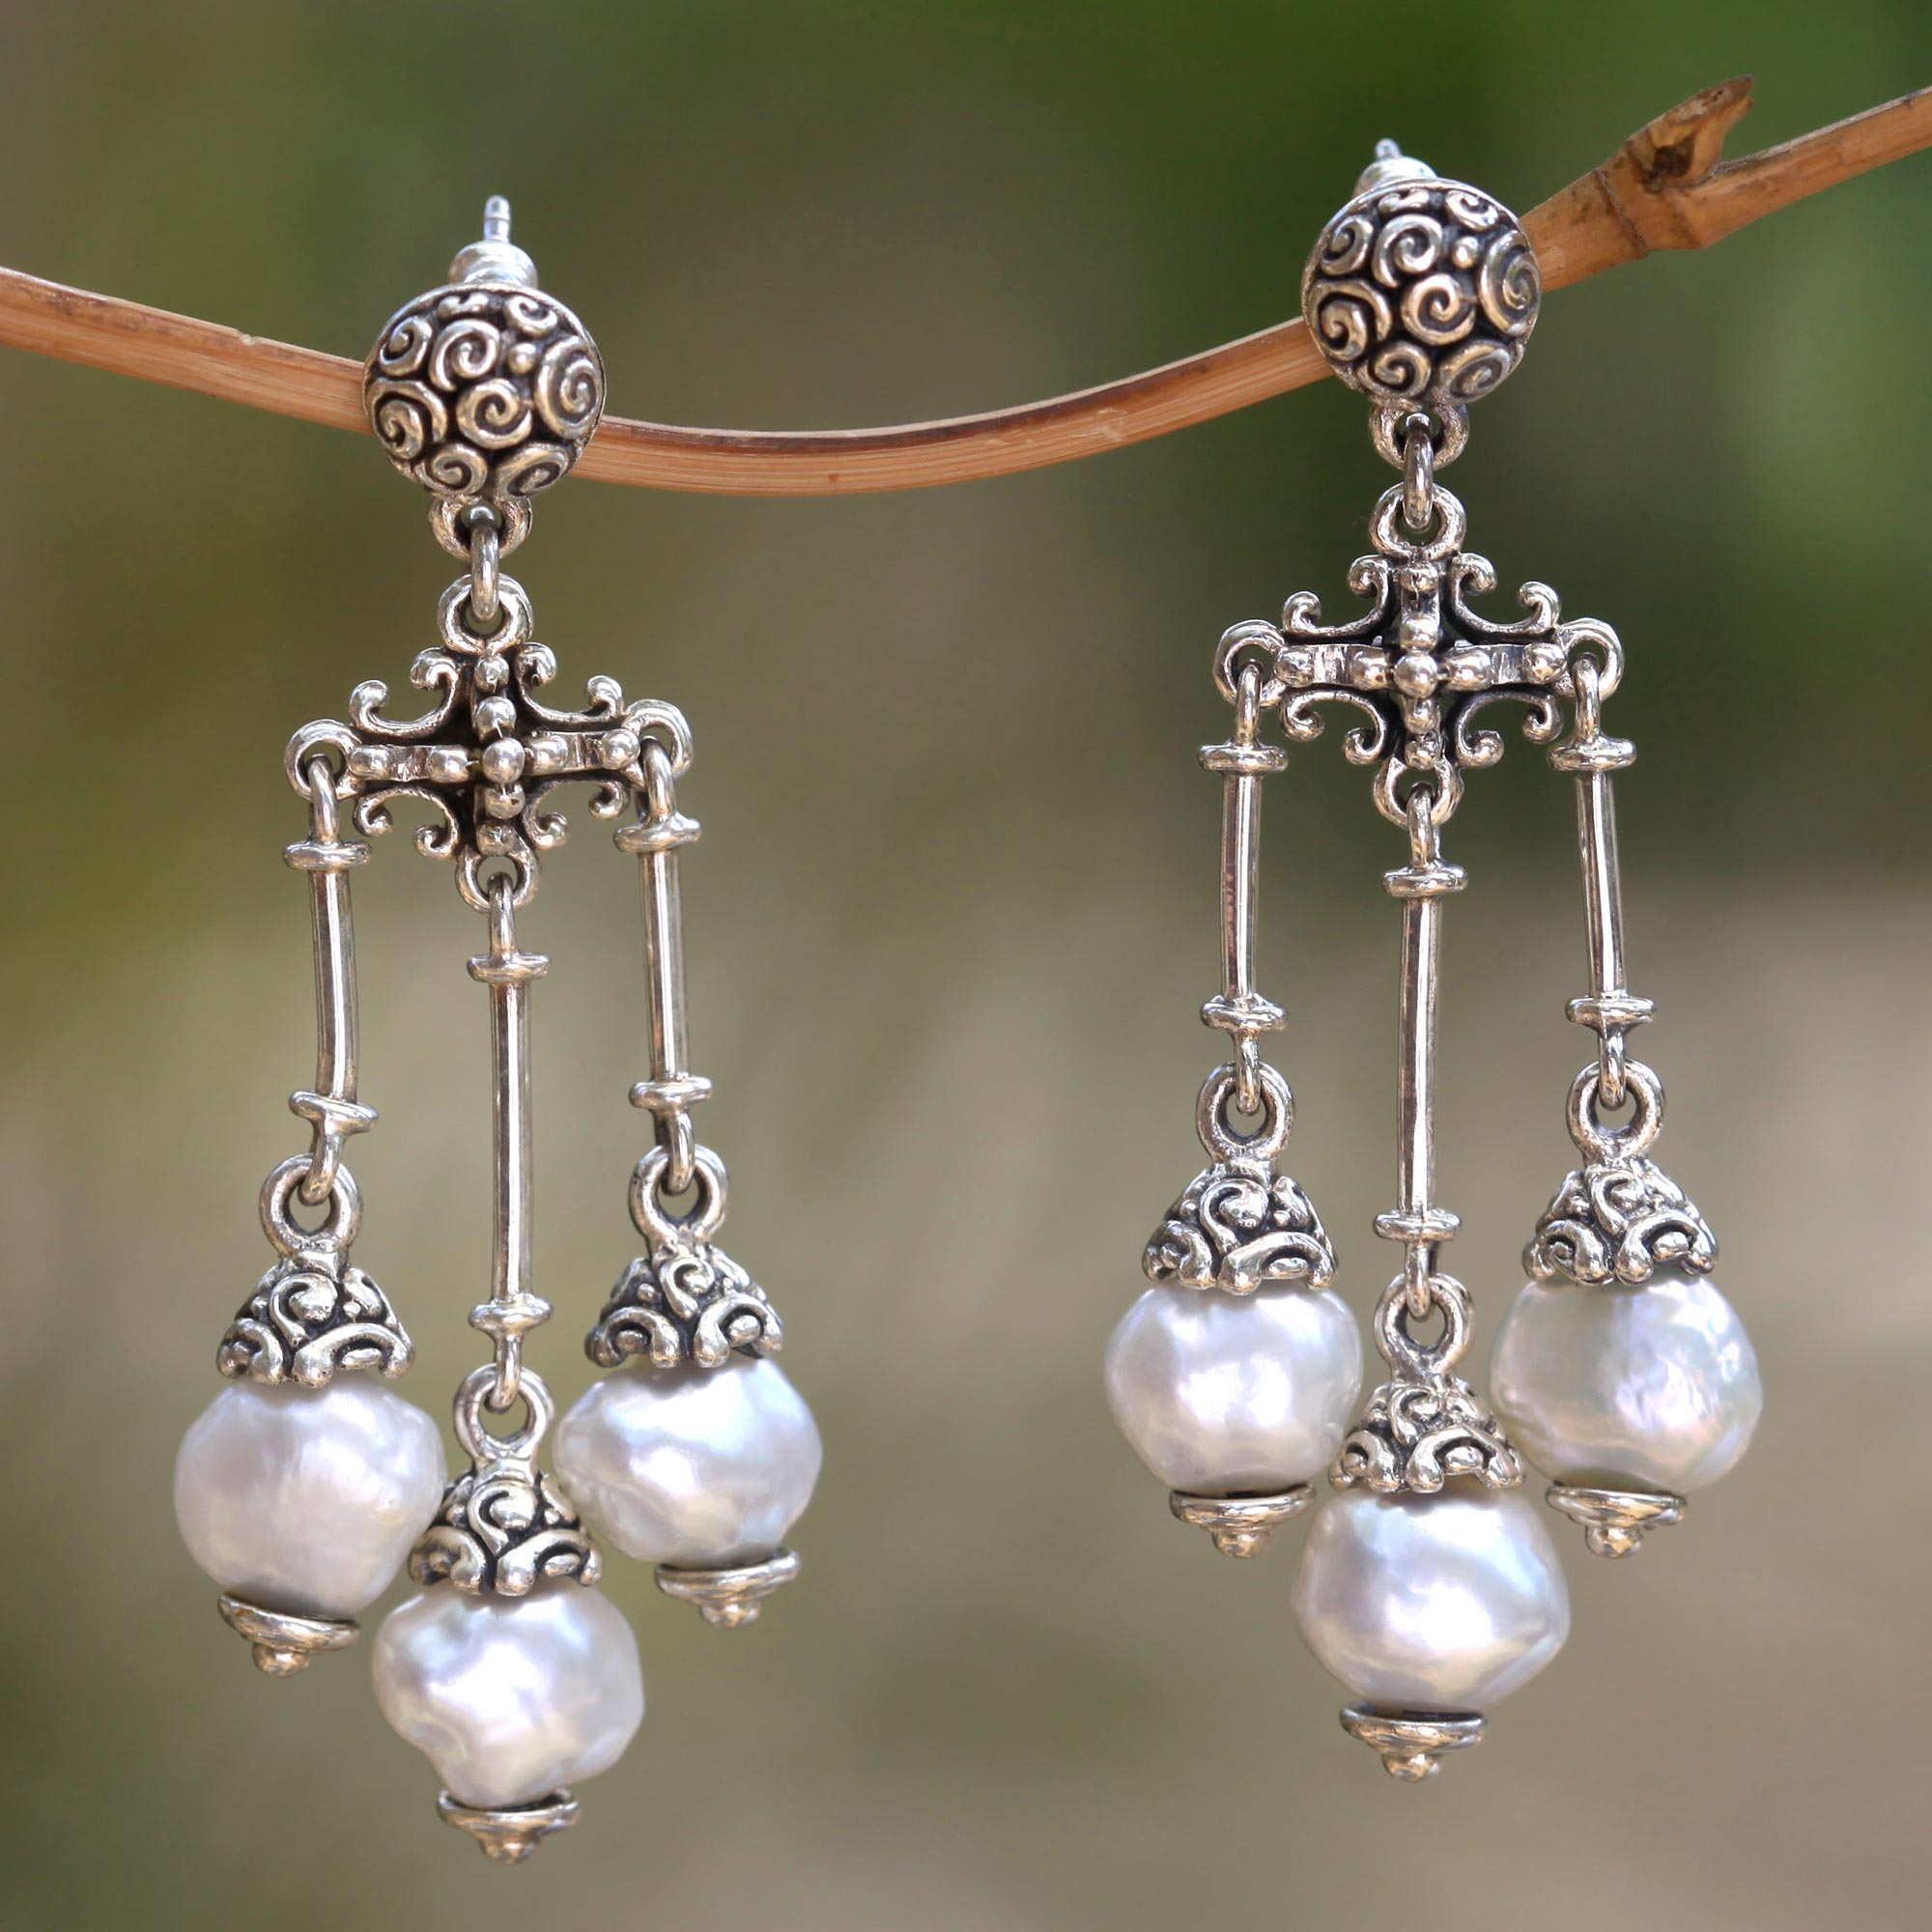 Sterling Silver with Cultured Pearls Chandelier Earrings , 'Transcendent Moons' Handcrafted jewelry